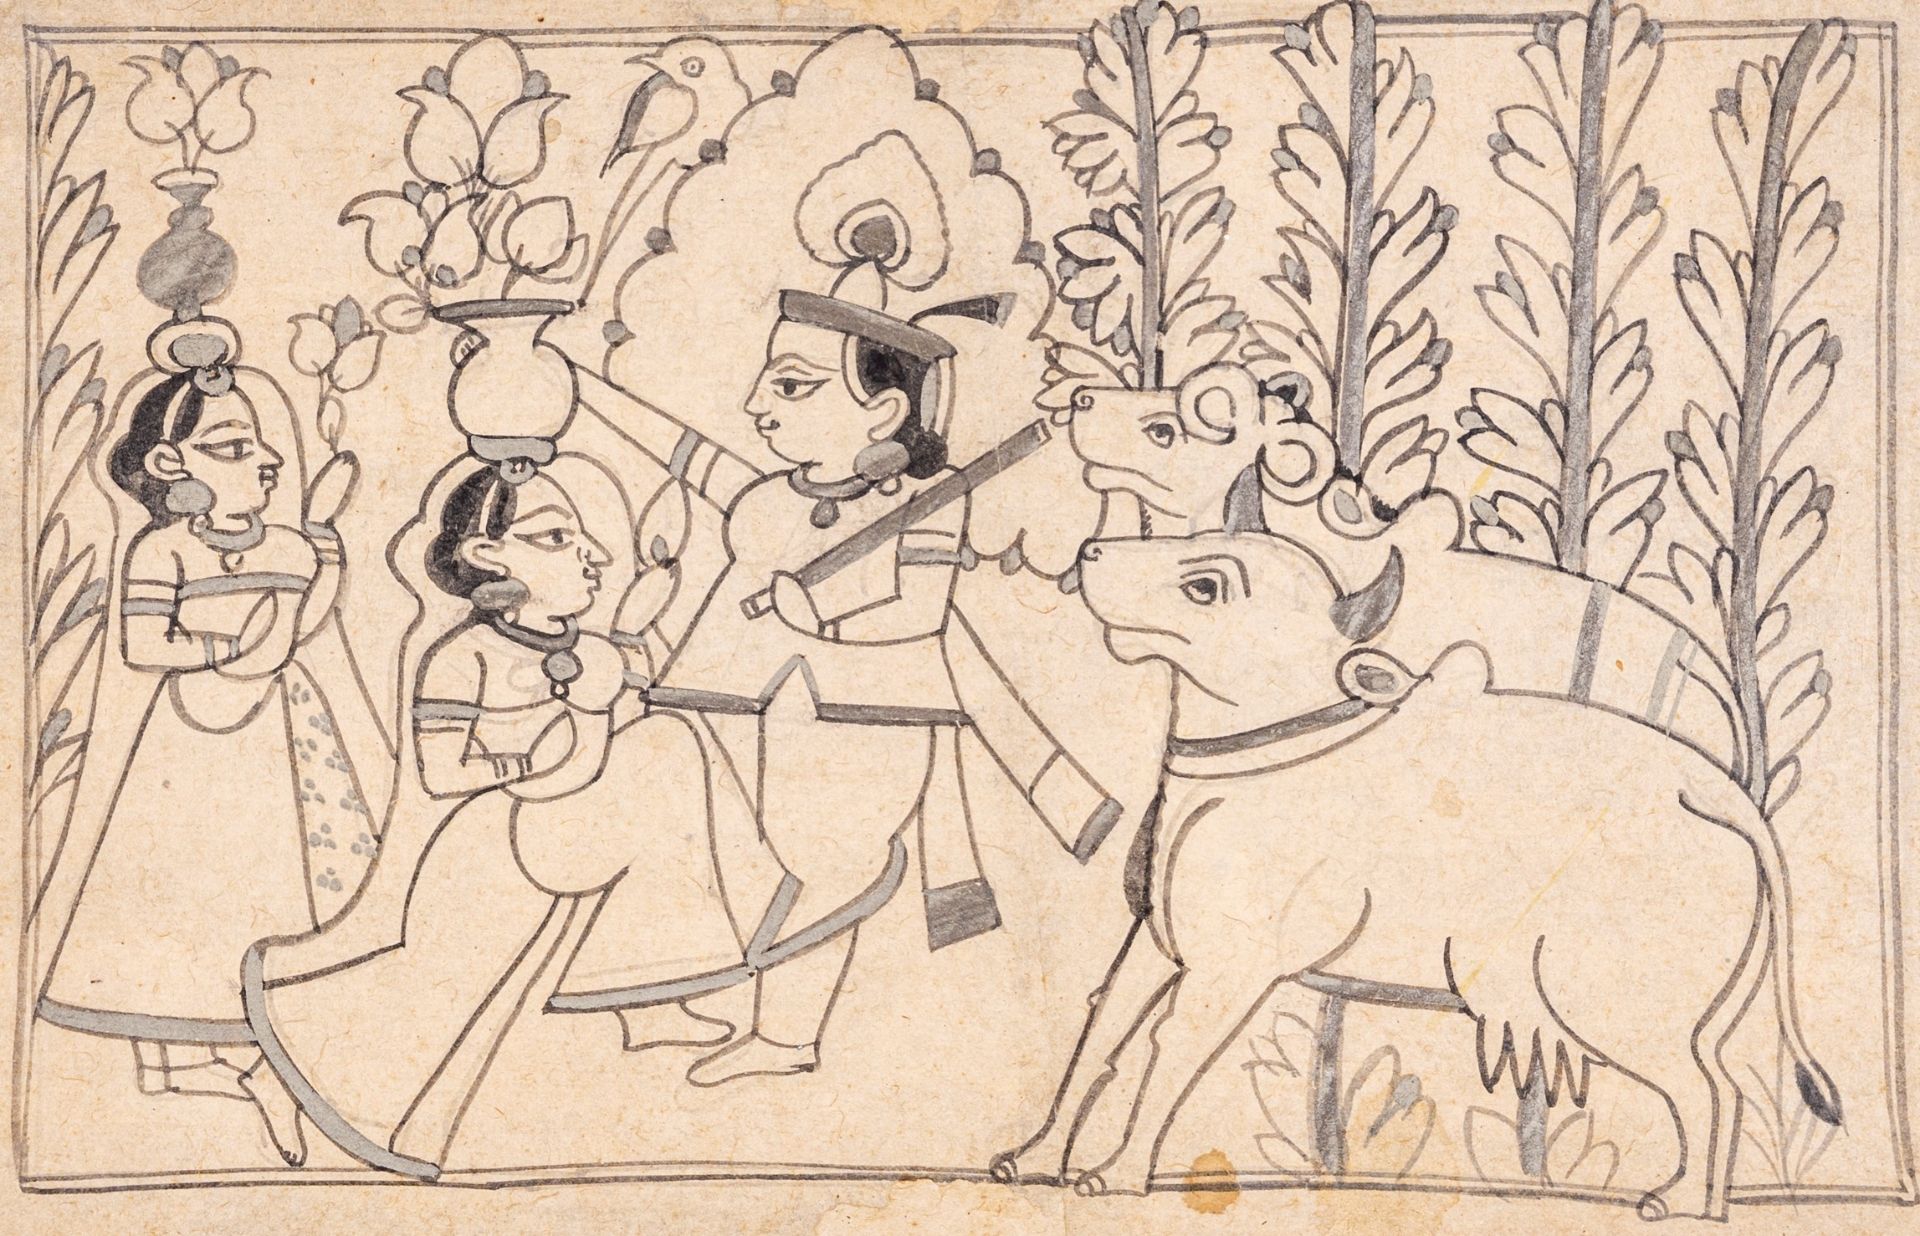 AN INDIAN MINIATURE PAINTING OF KRISHNA WITH GOPIS, c. 1870s